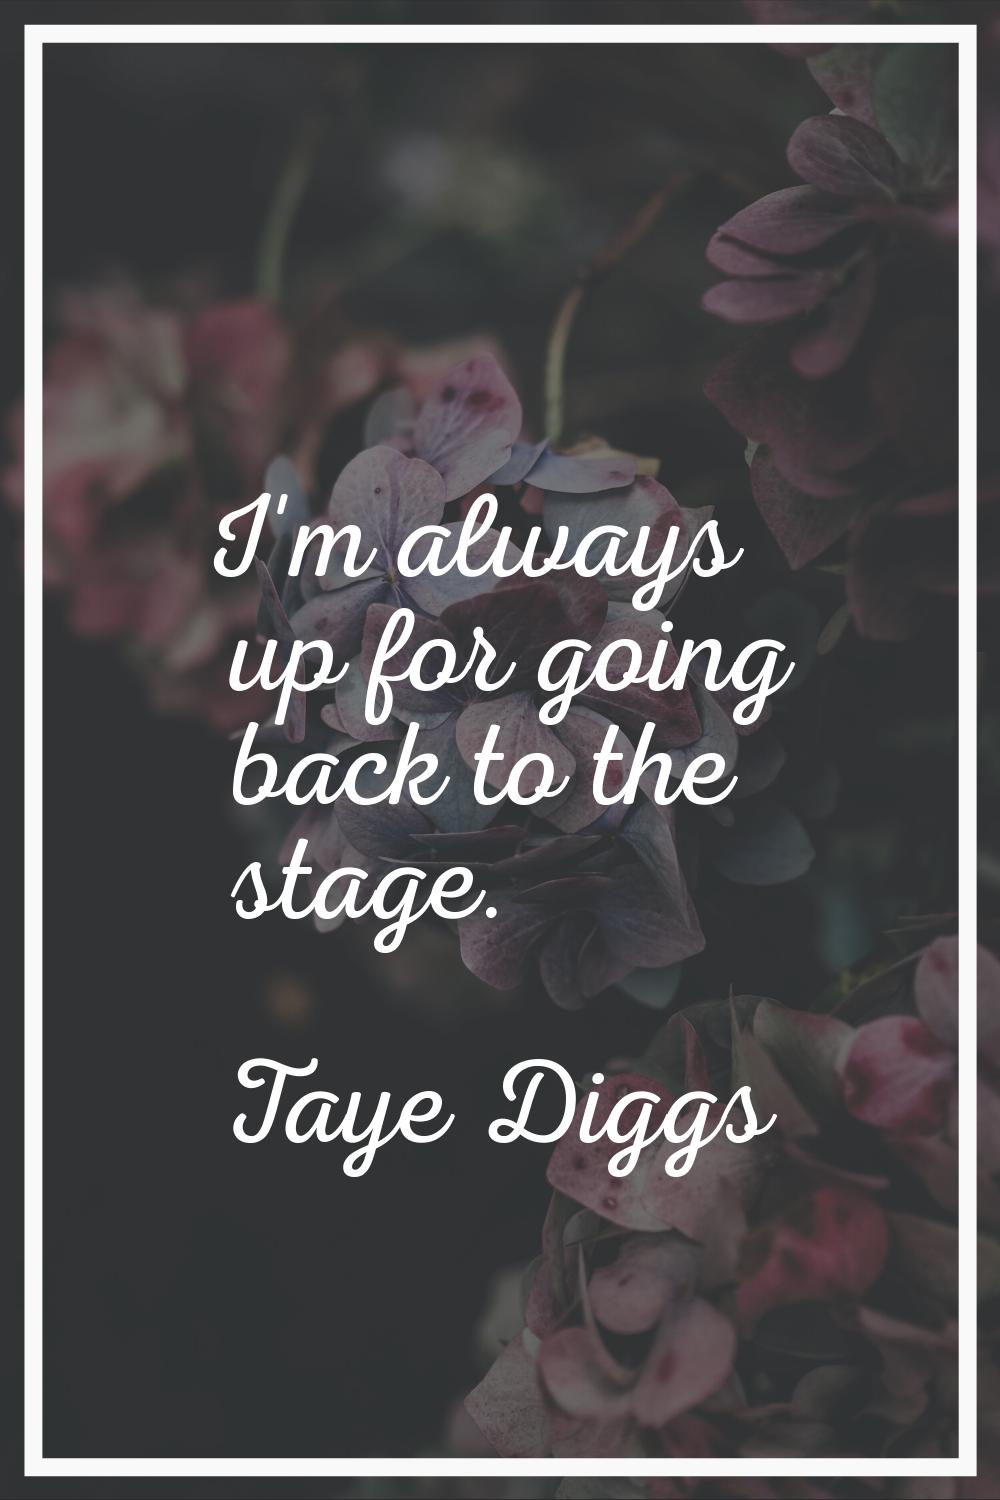 I'm always up for going back to the stage.